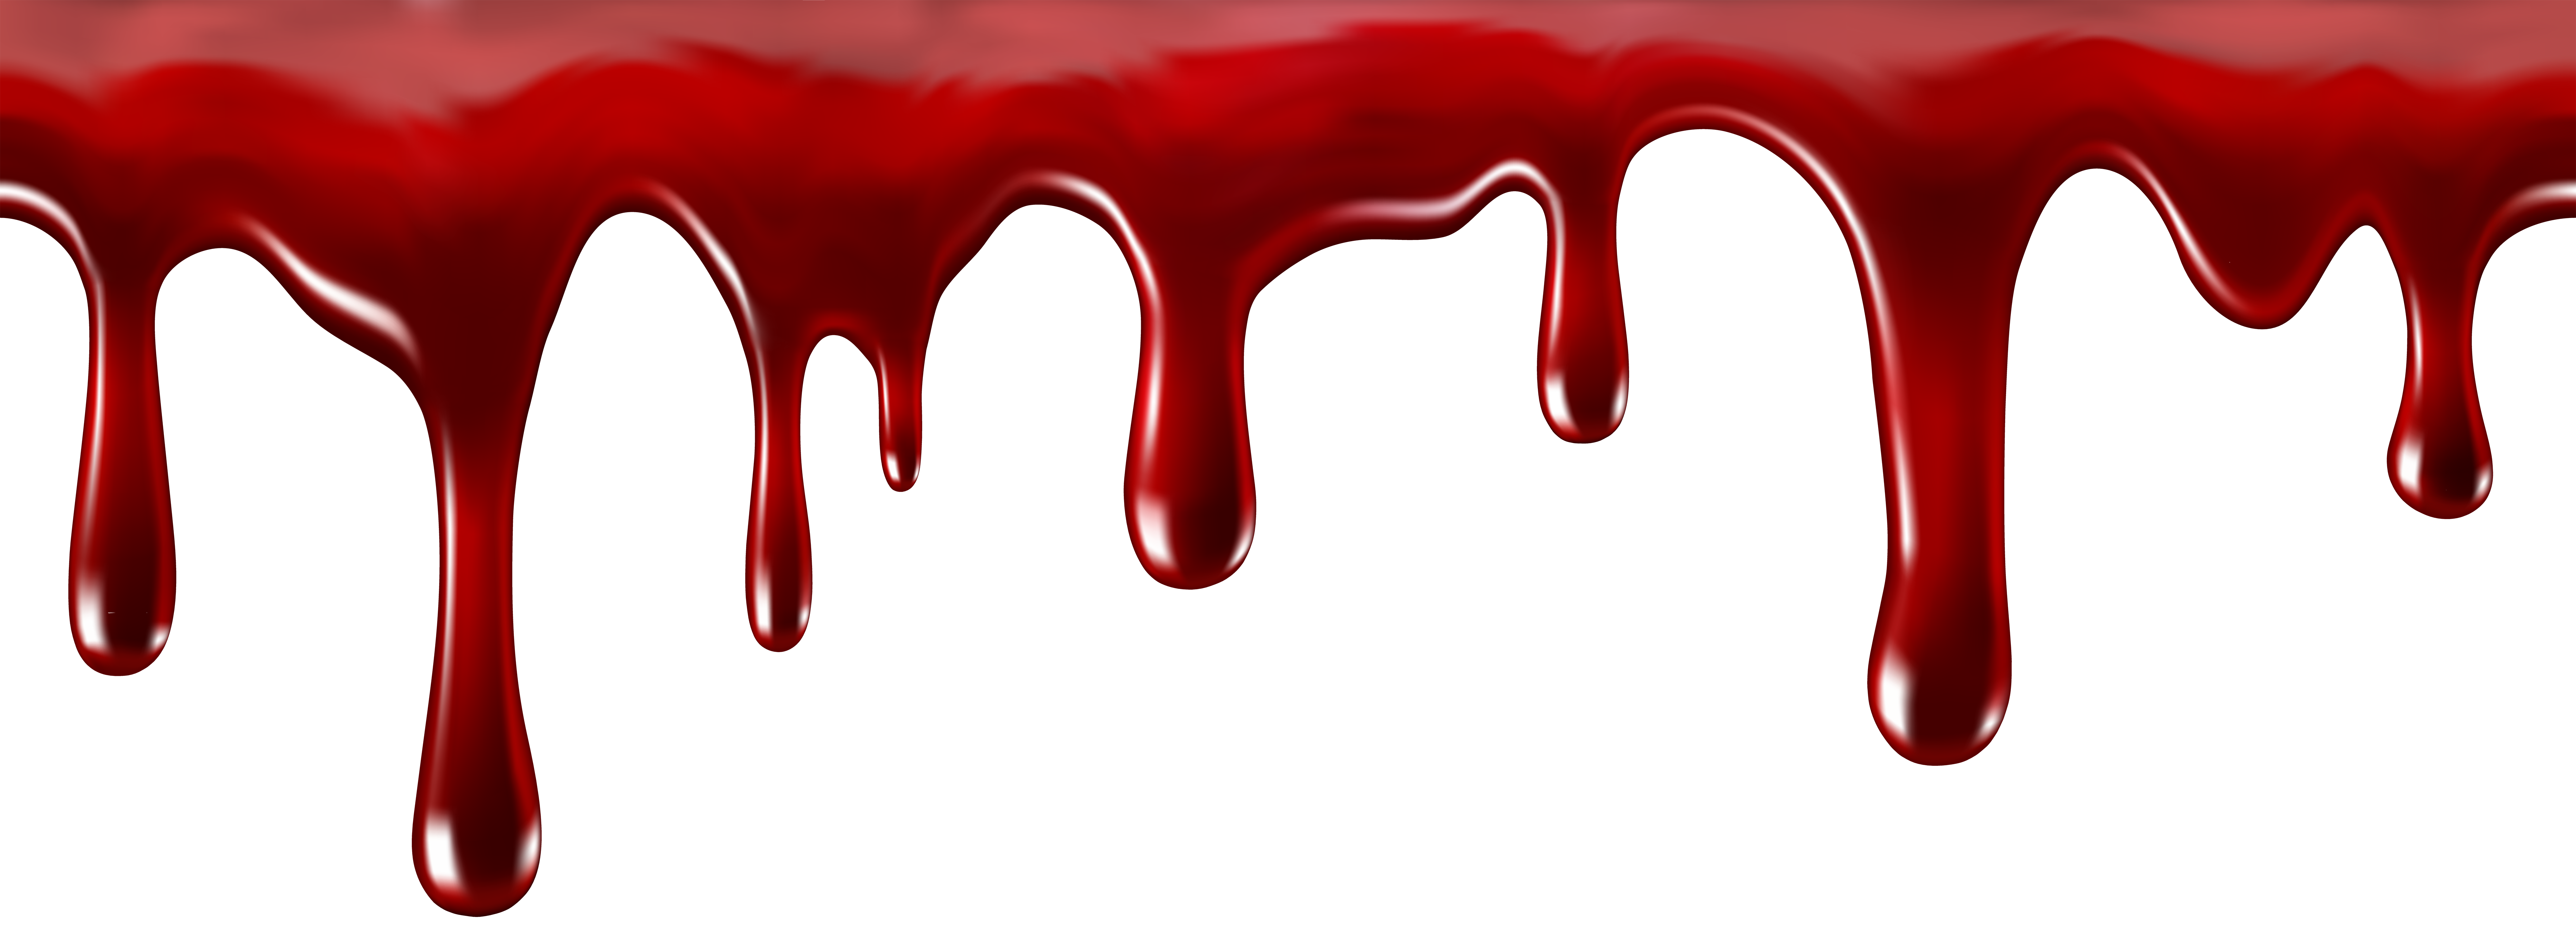 clipart picture of blood - photo #42